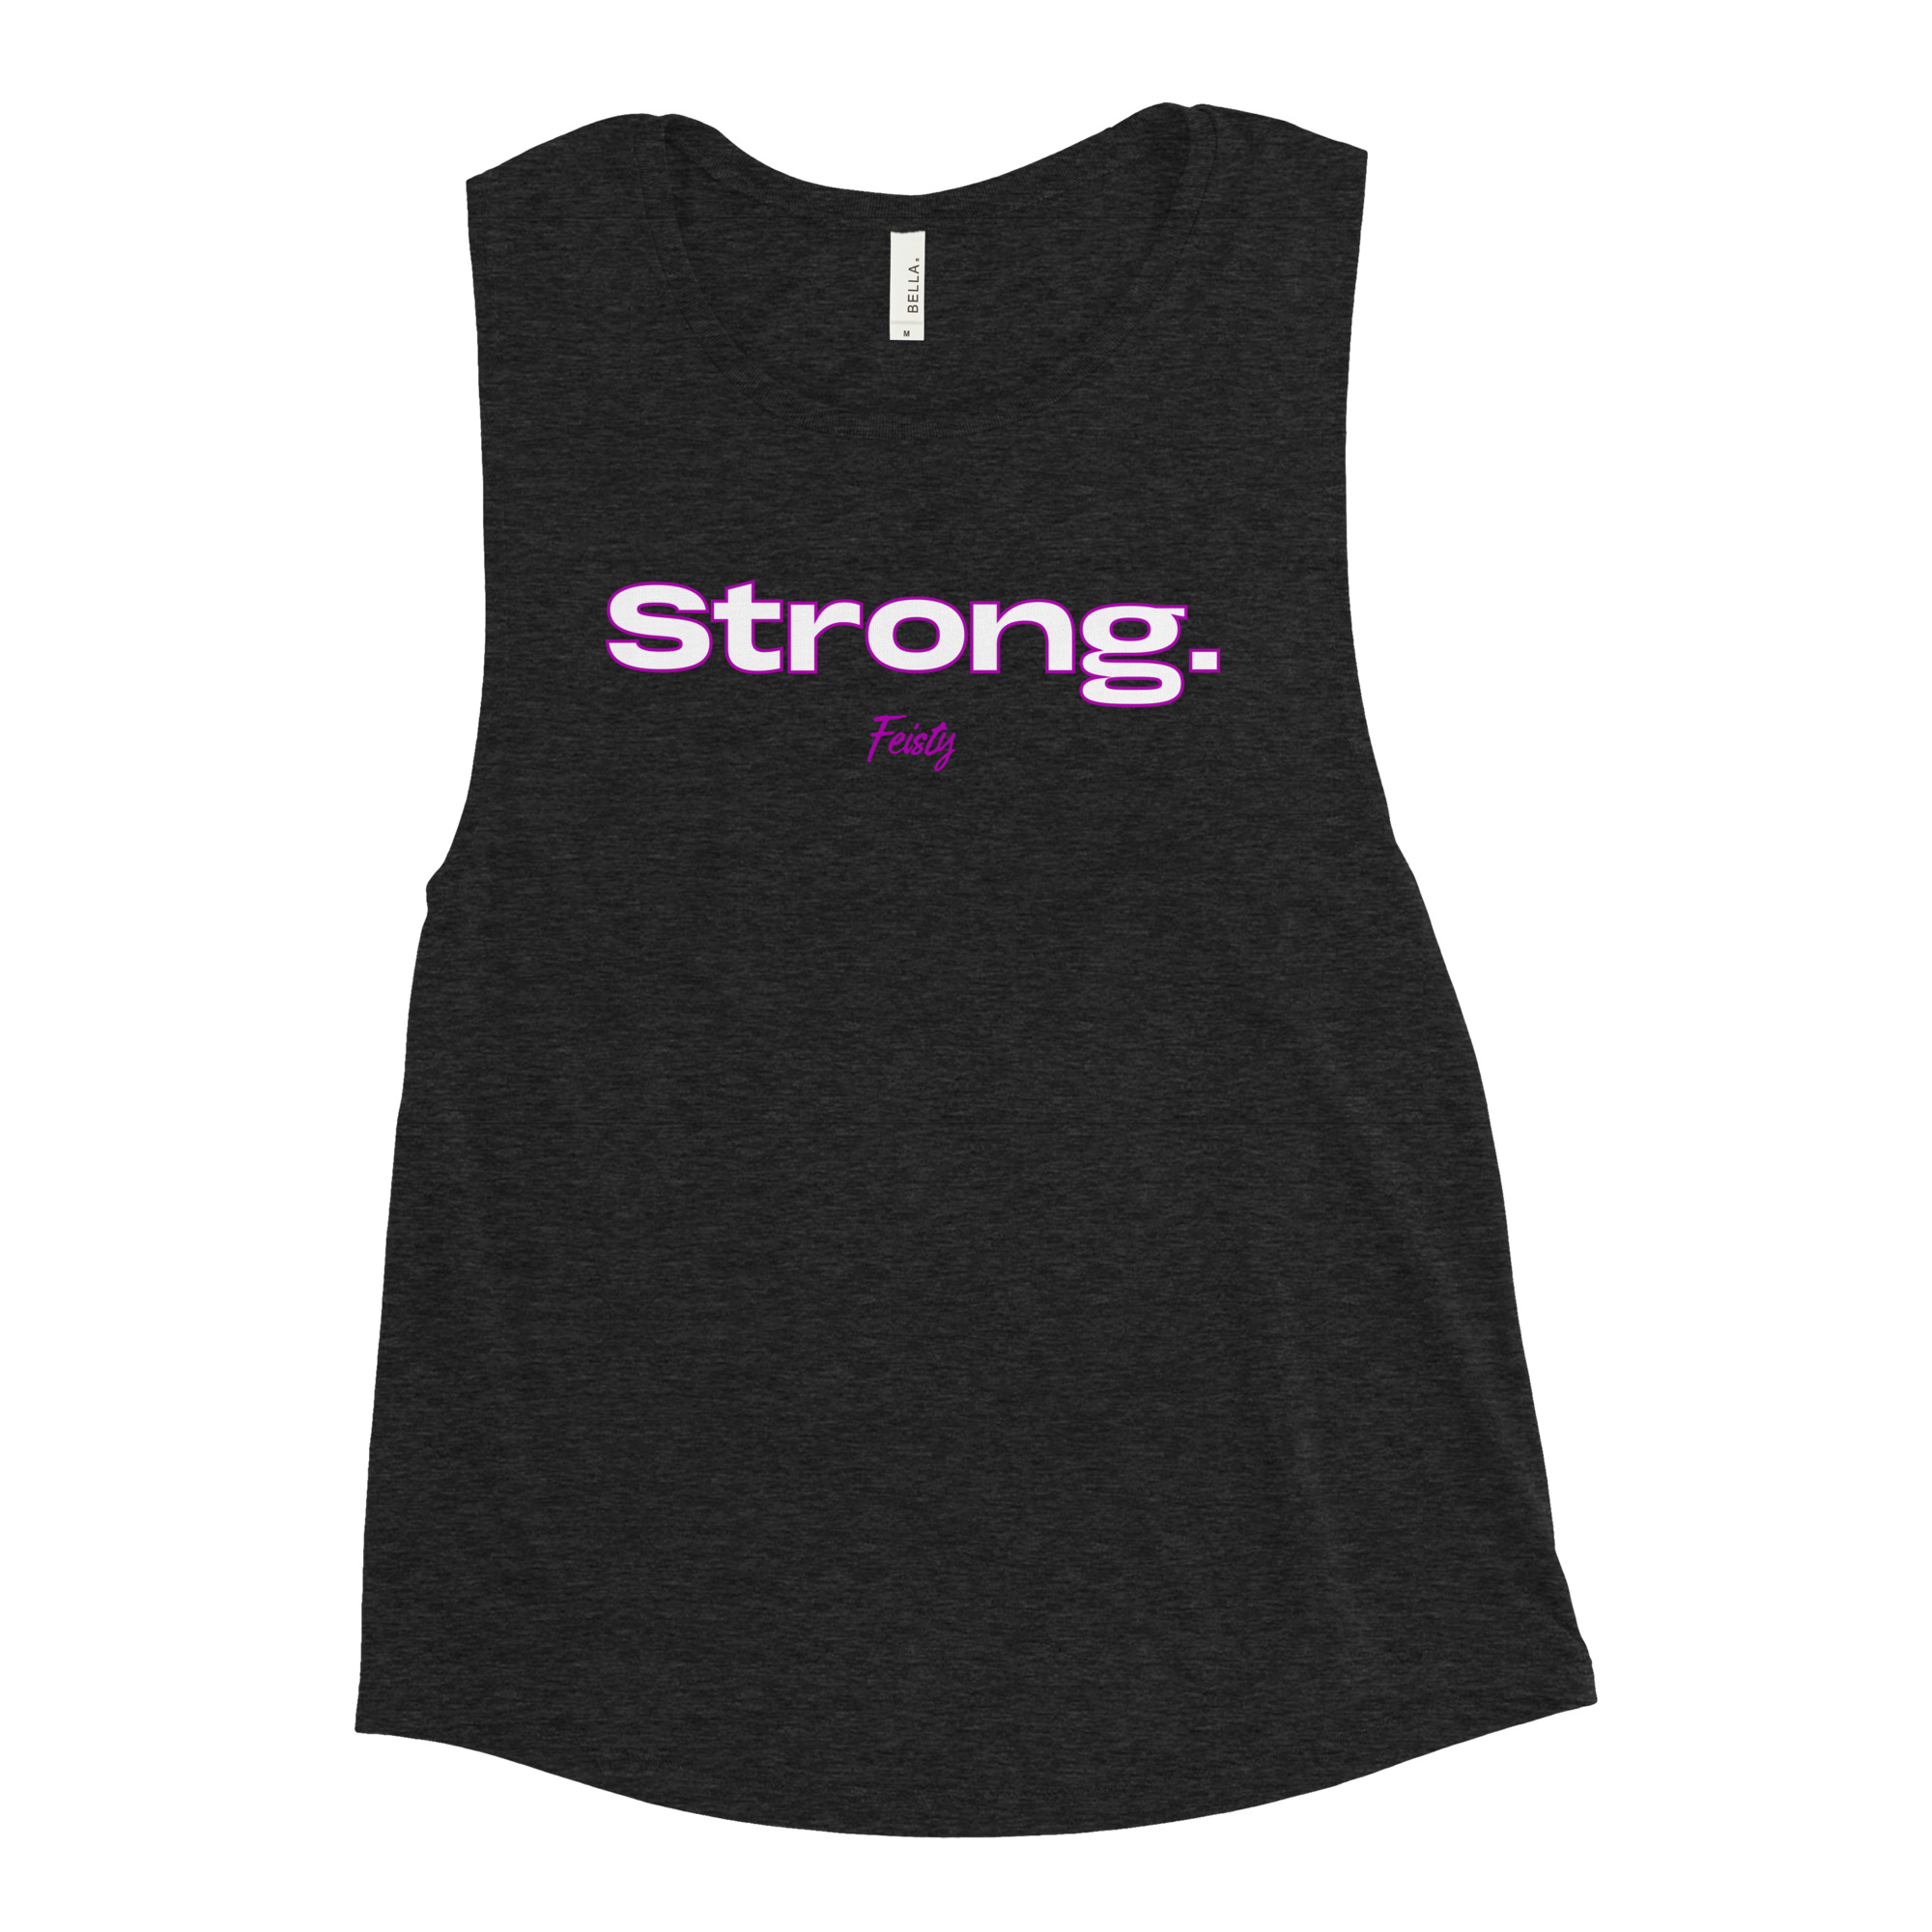 STRONG Tank (Women's Sizing) - Live Feisty